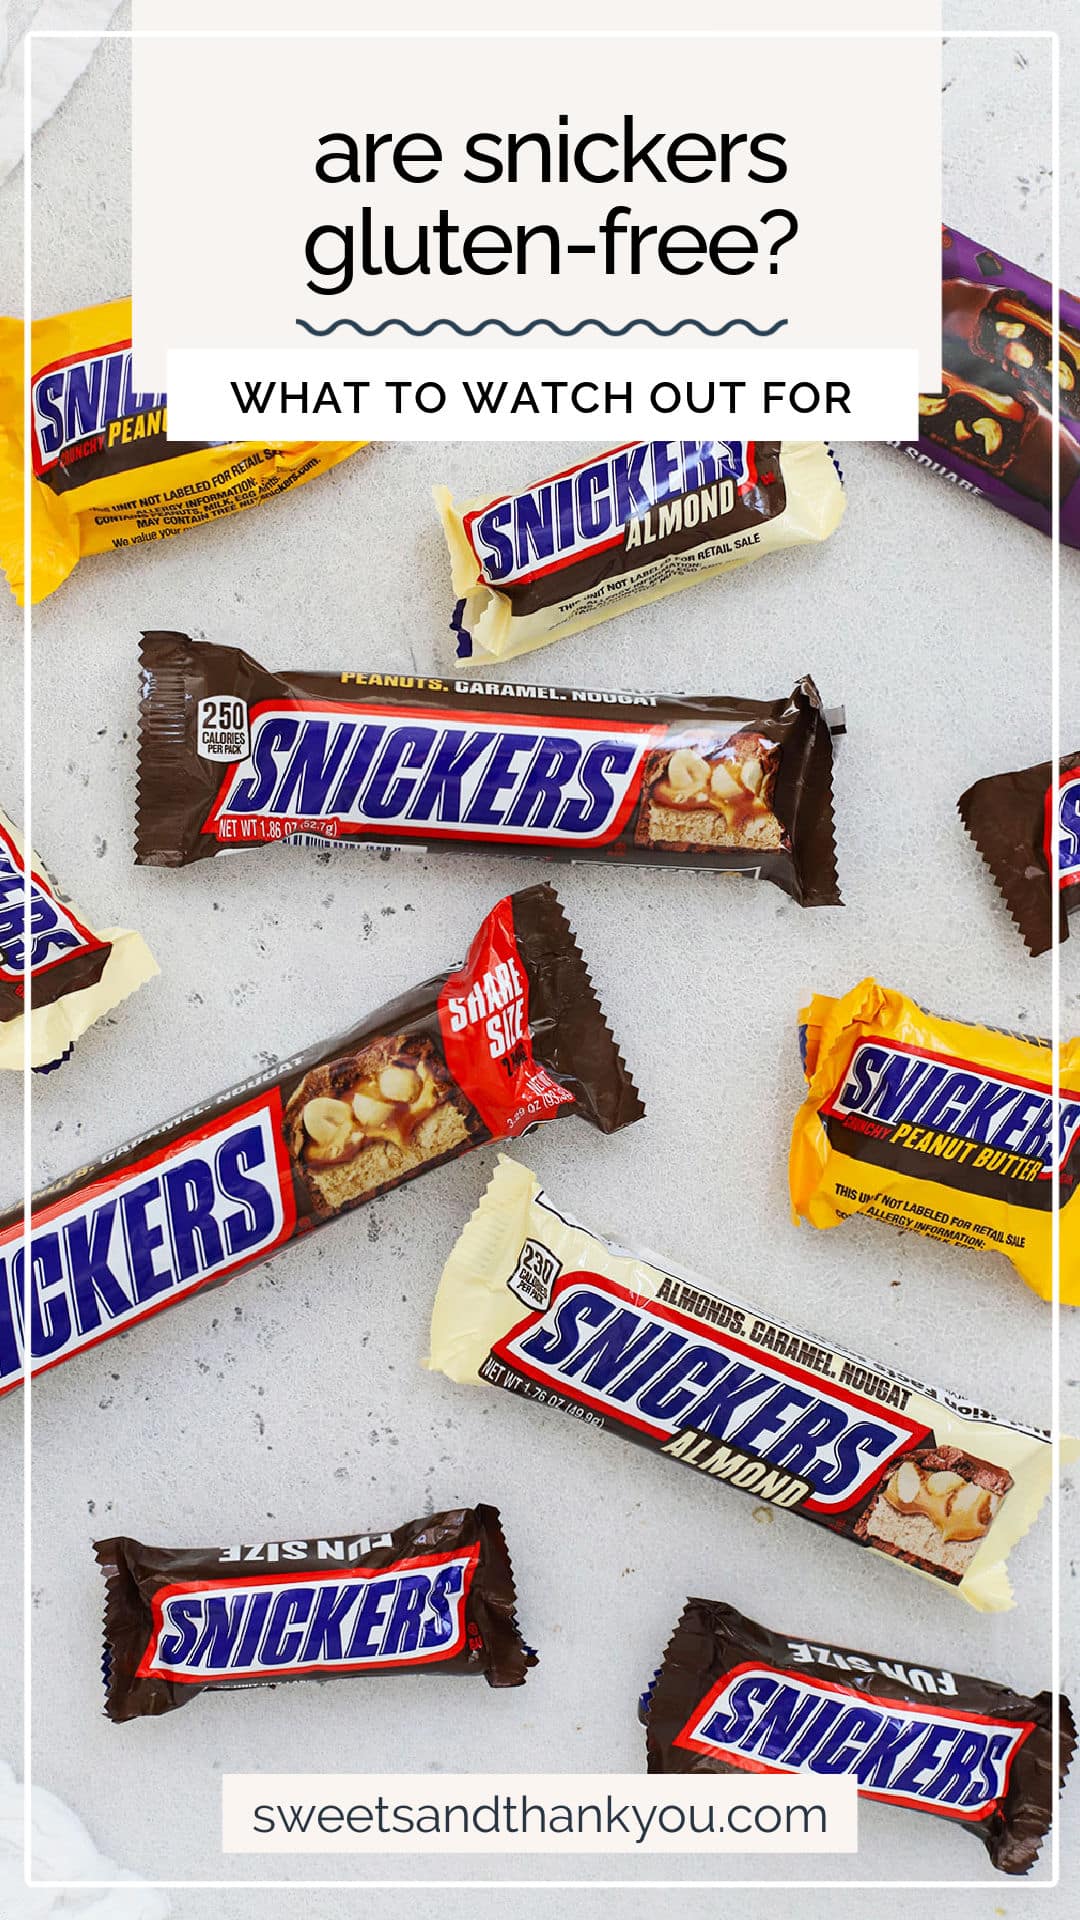 Wondering if Snickers are gluten-free? Get the scoop on which varieties are safe to eat, what to watch out for, and more! / are snickers candy bars gluten-free / is snickers gluten-free / gluten-free candy bars / gluten-free halloween candy / which candy bars are gluten-free / is snickers bar gluten-free